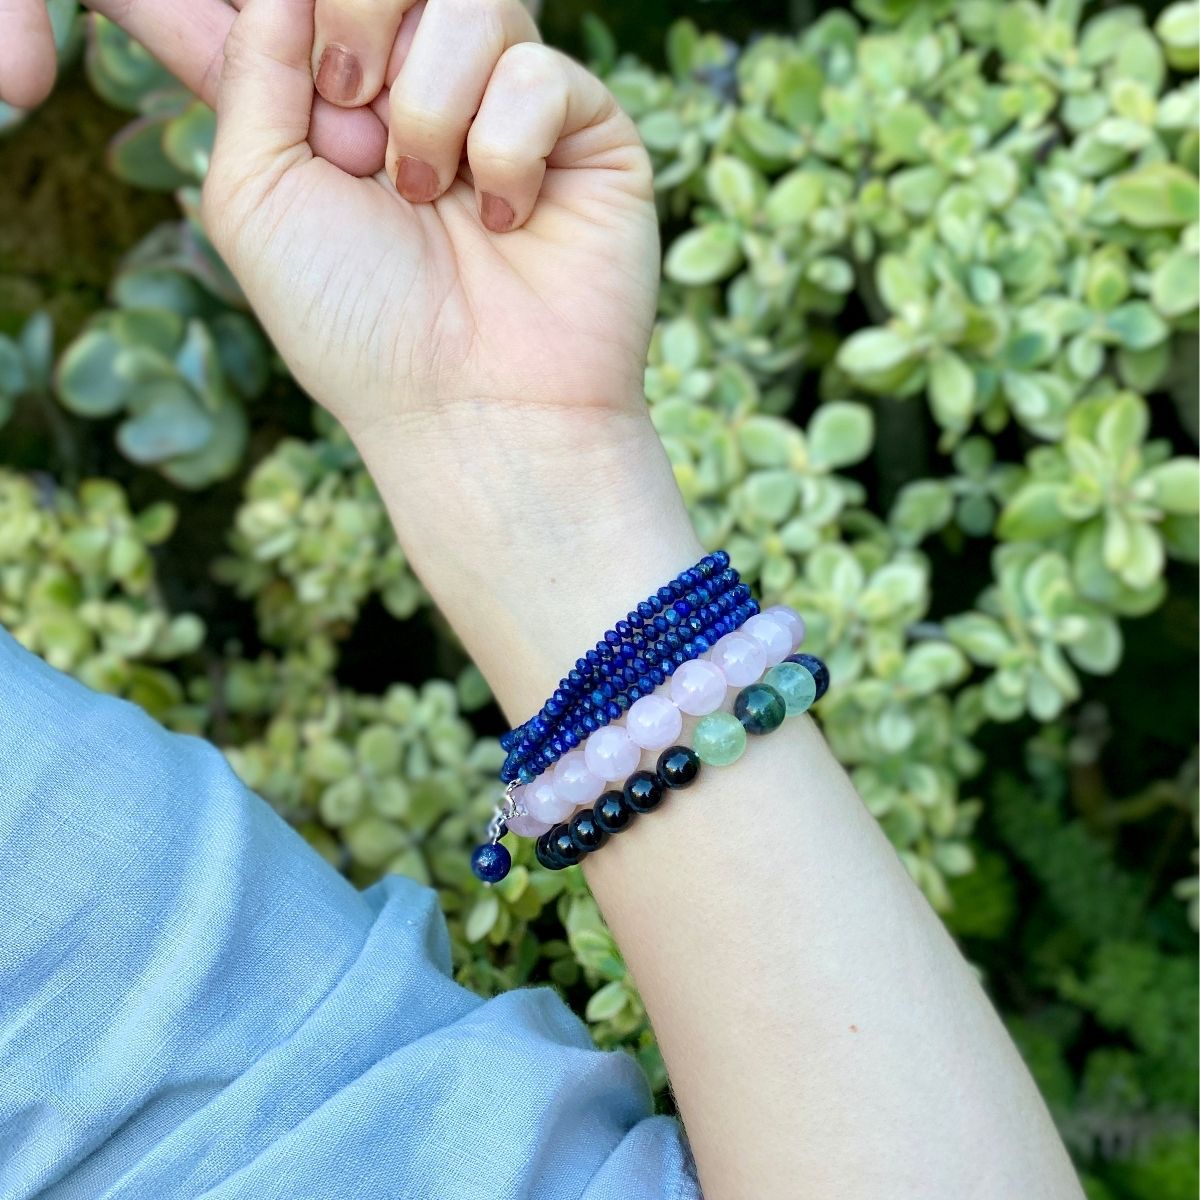 Confidence Bracelet Stack. Believe that there is nothing that you can't accomplish if you put your mind and heart to it. Always believe that you can, and sooner or later you will. Wear this bracelets stack as a reminder every day you need a little push to get up and Believe in Your Dreams!